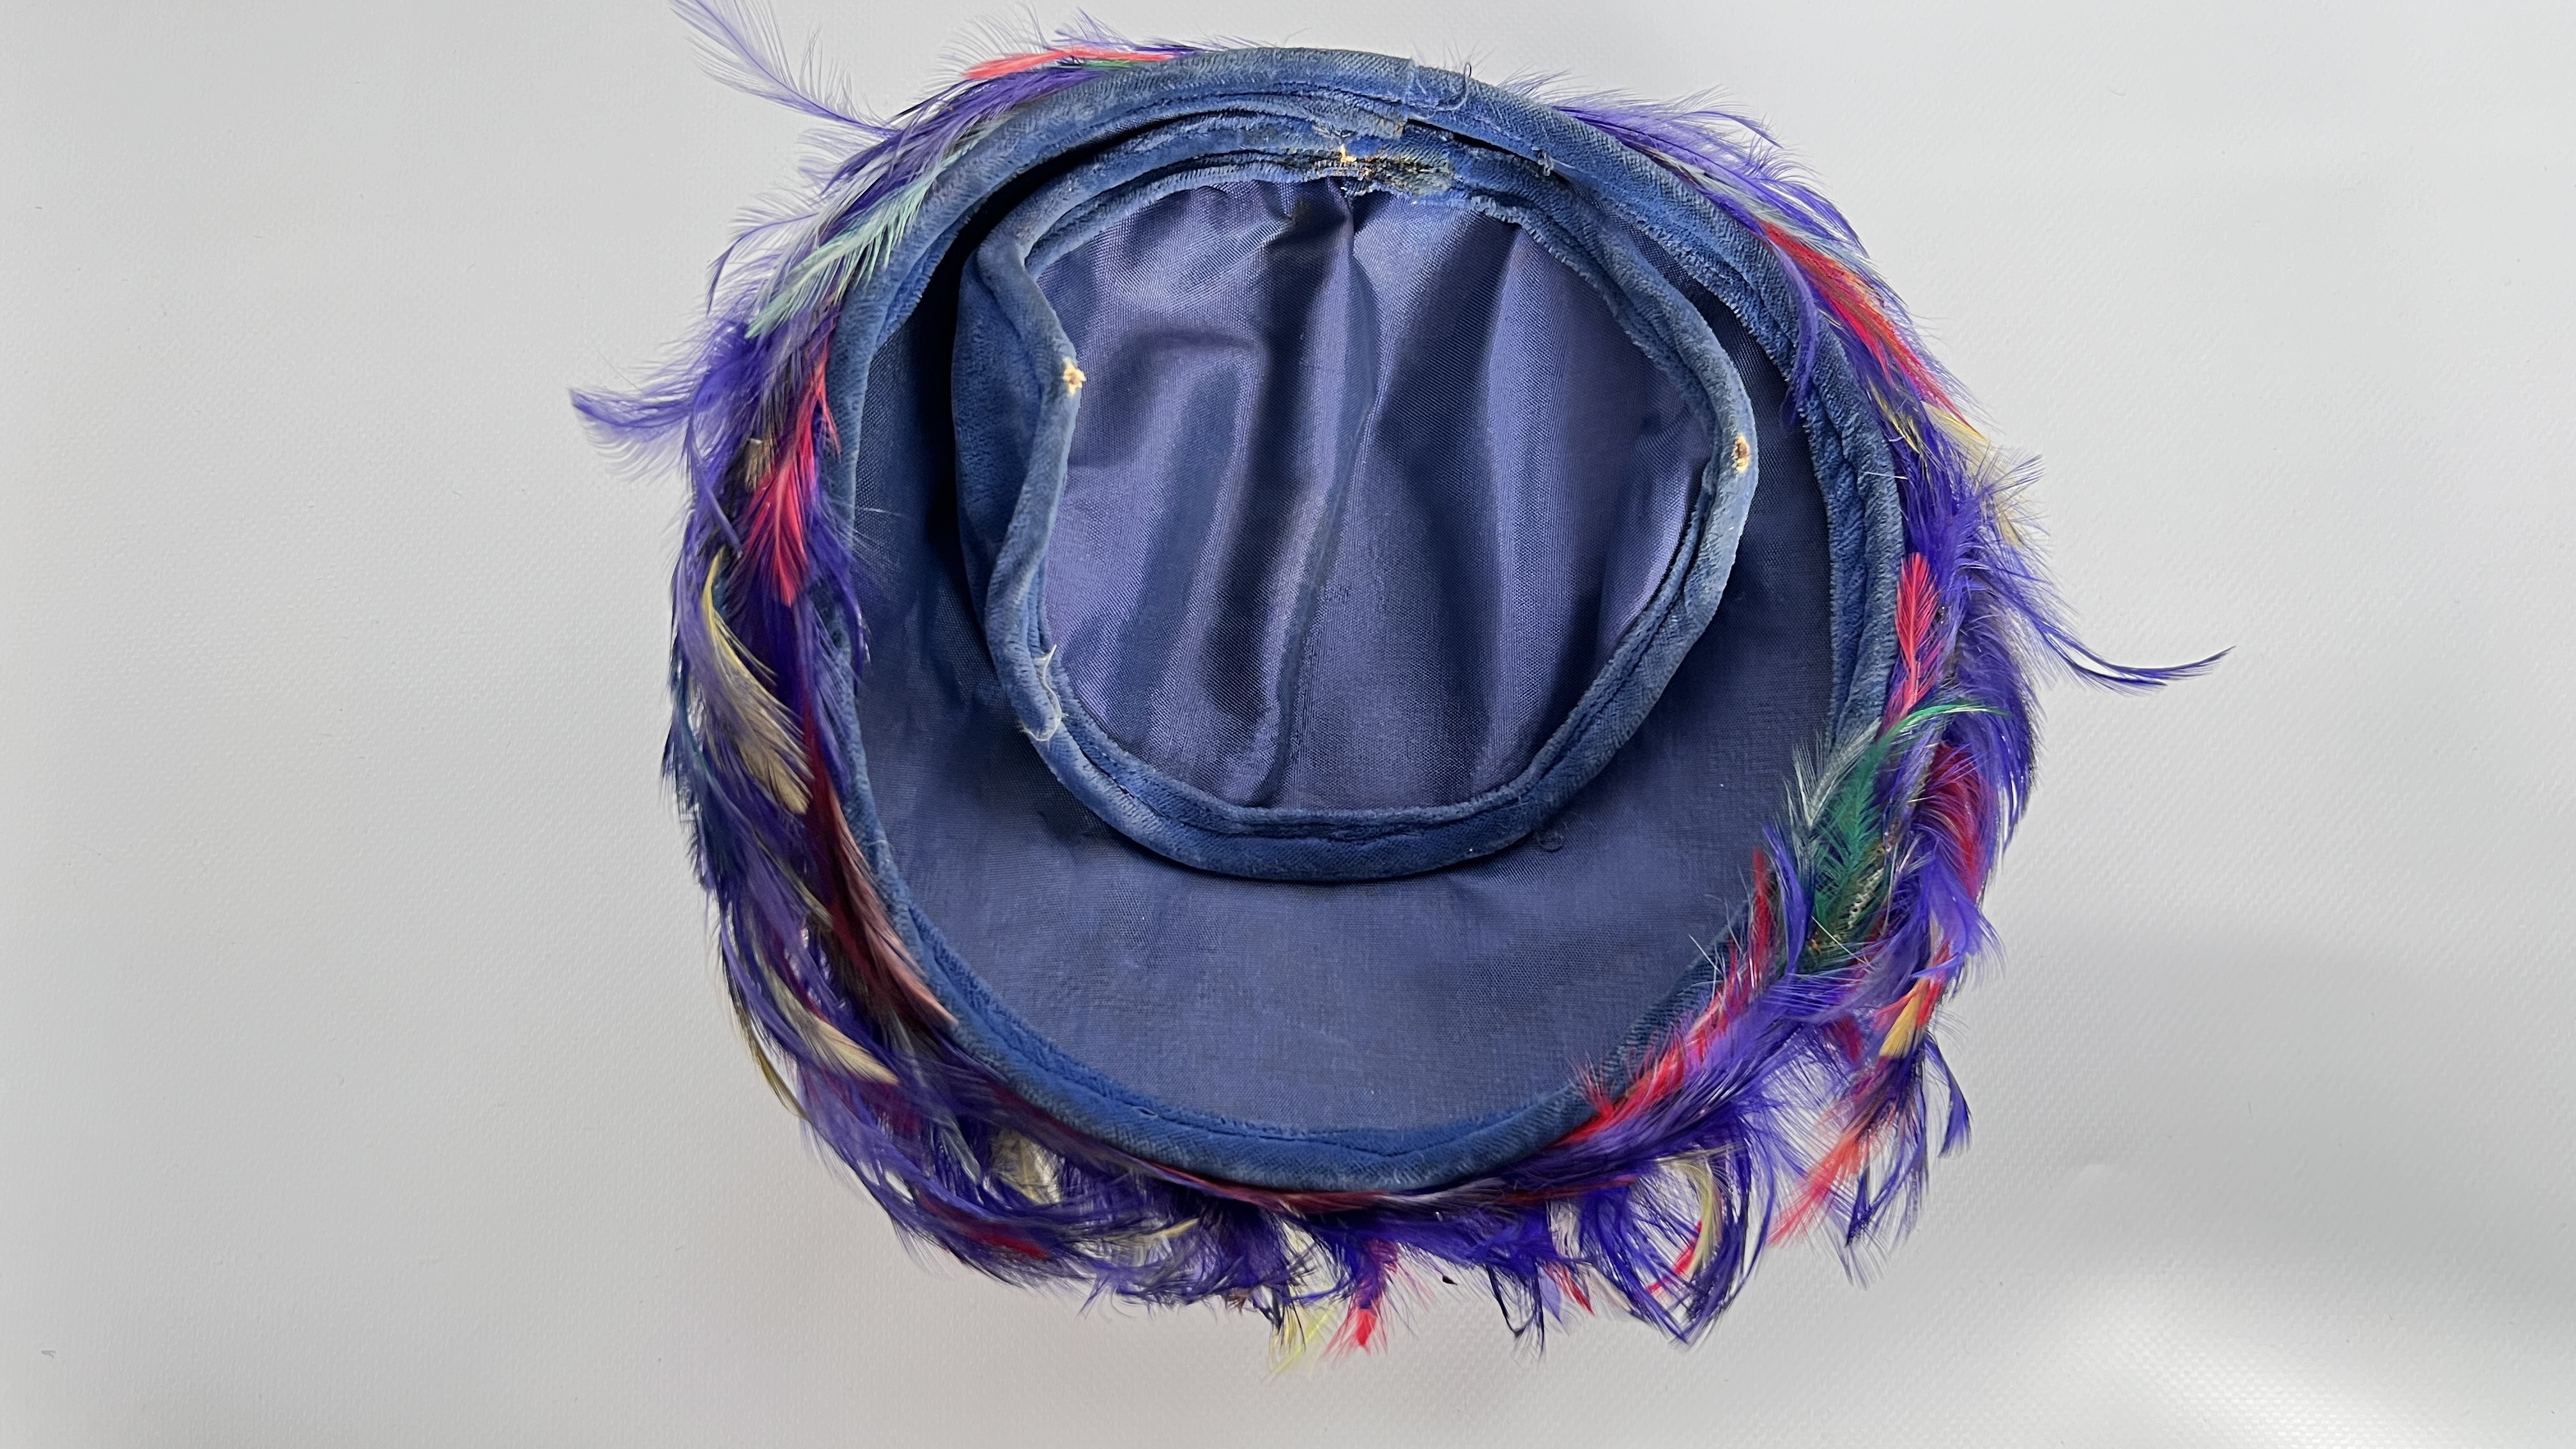 5 1940/50S HATS, 1 MULTI COLOURED FEATHER, 1LILAC/GREY STRAW (FADED) WITH FLOWERS, 1 BROWN STRAW, - Image 10 of 27